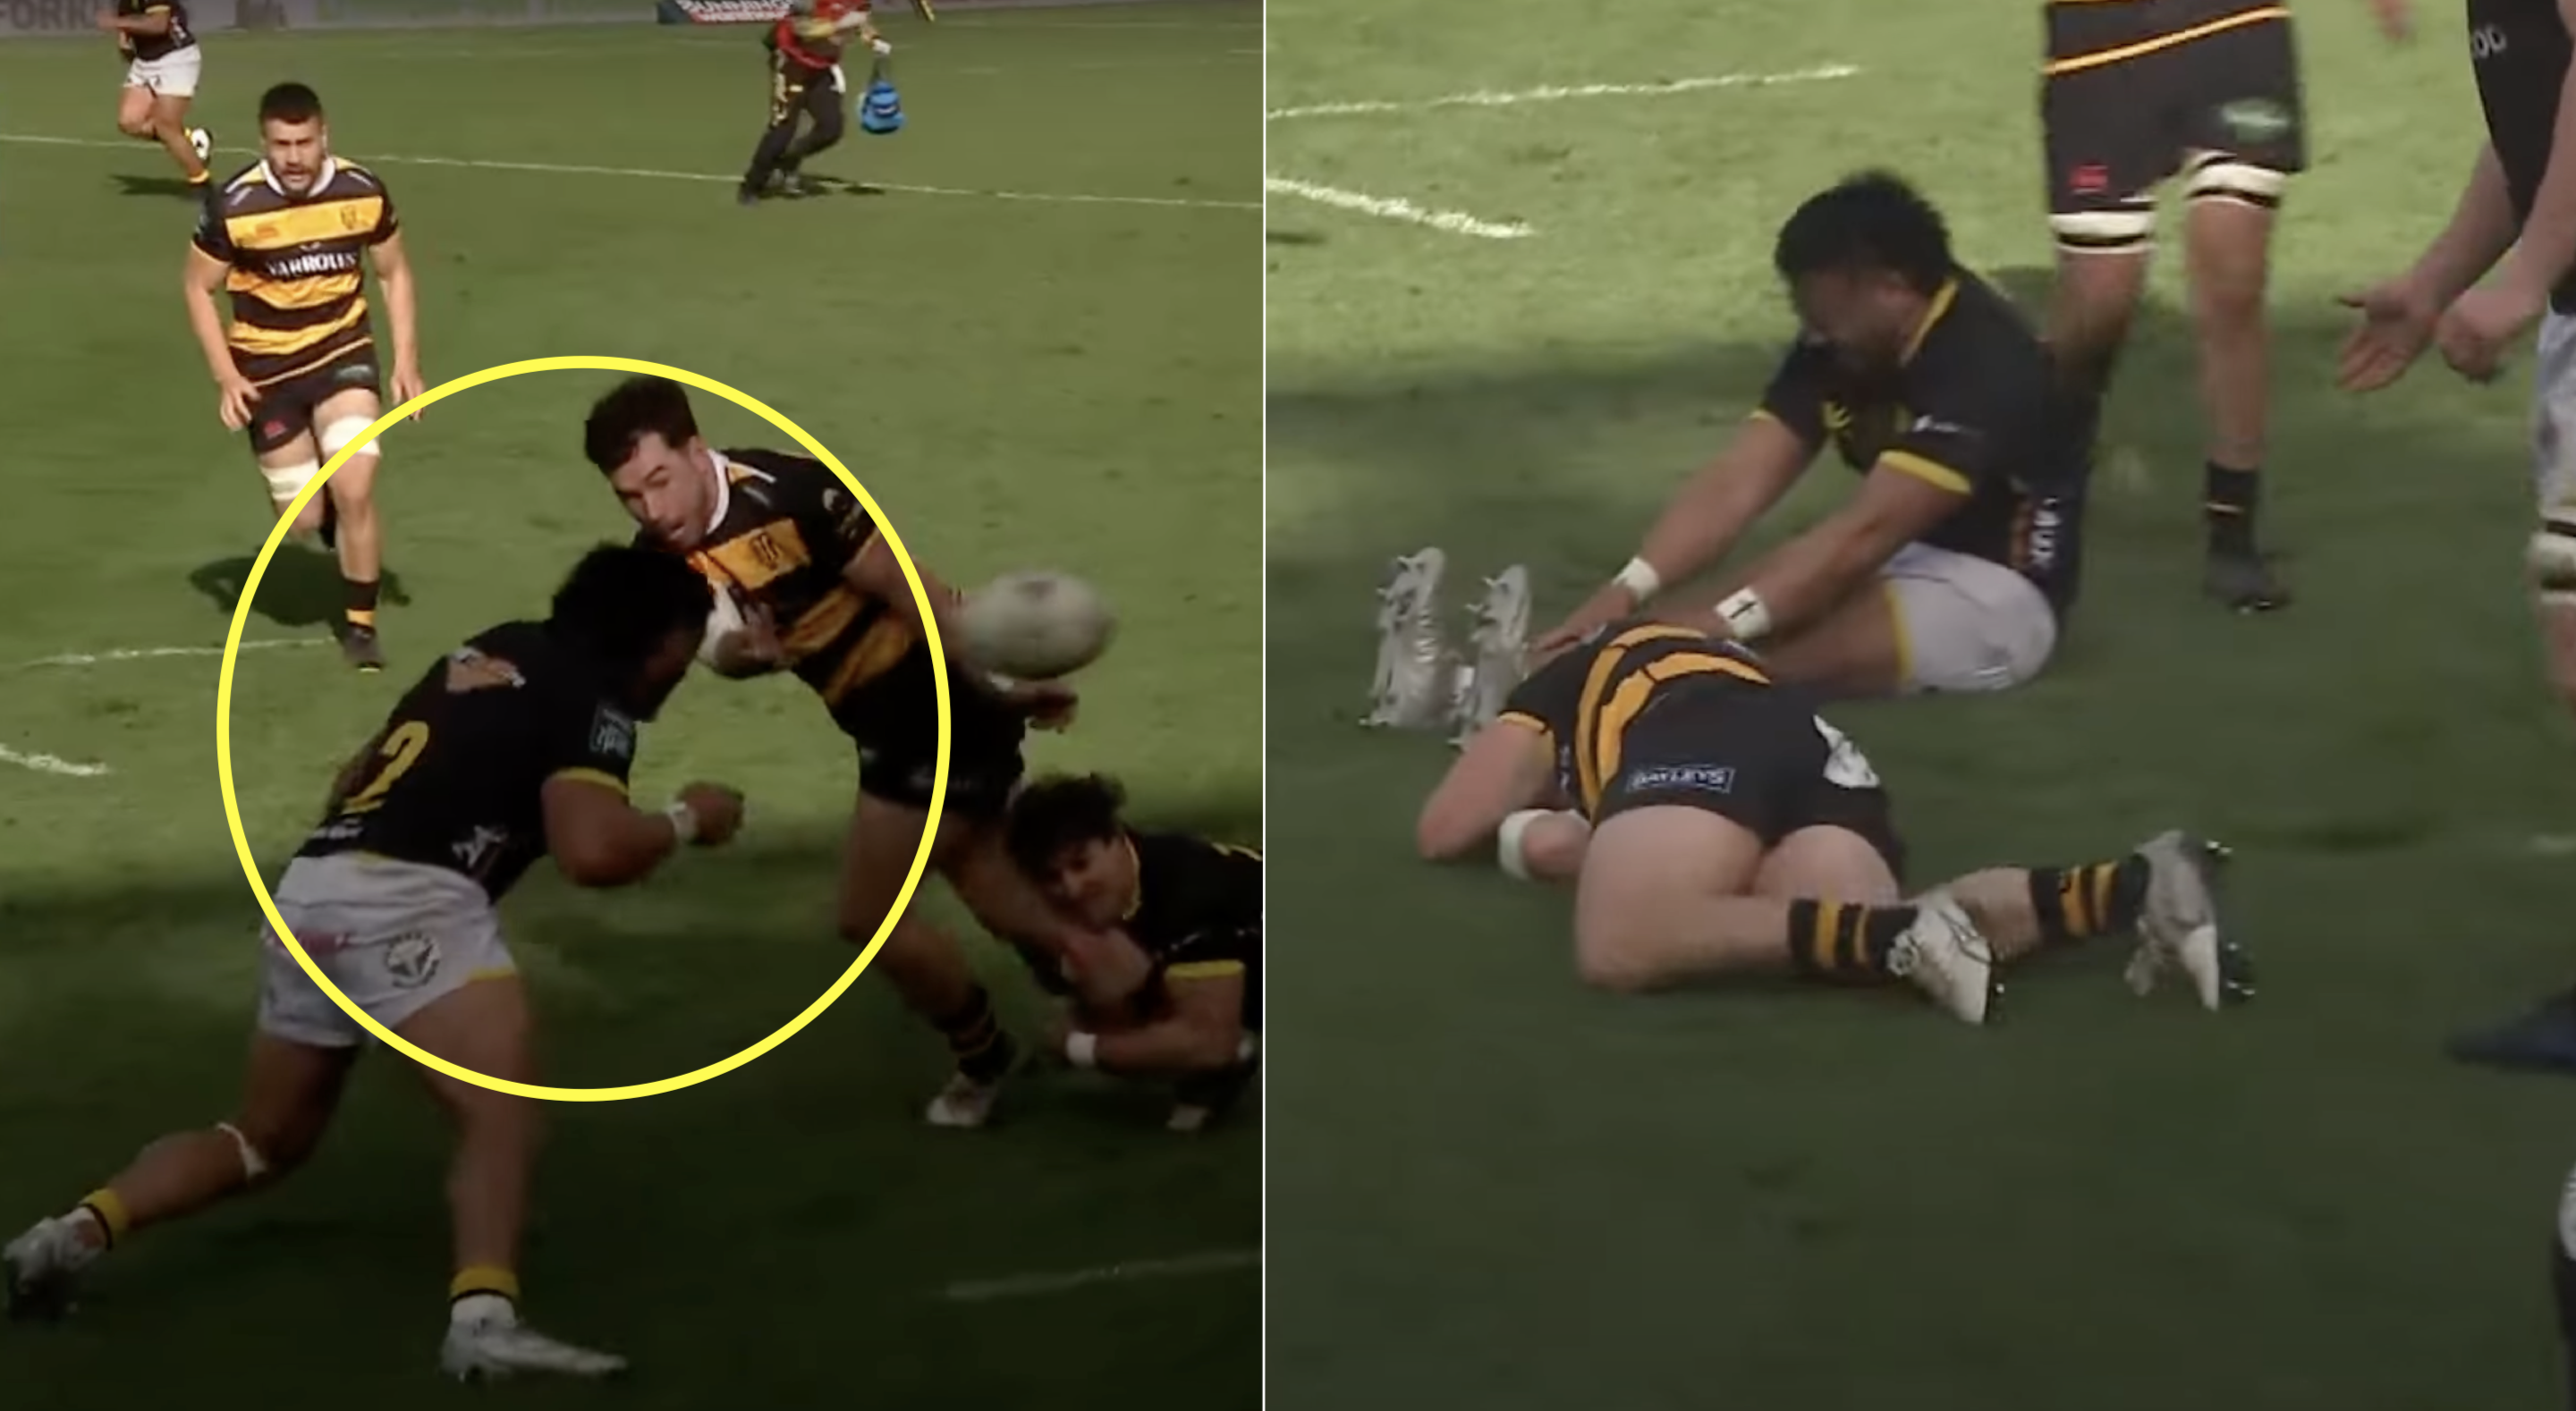 New Zealand refs still in dark ages as All Black only yellowed for horror tackle